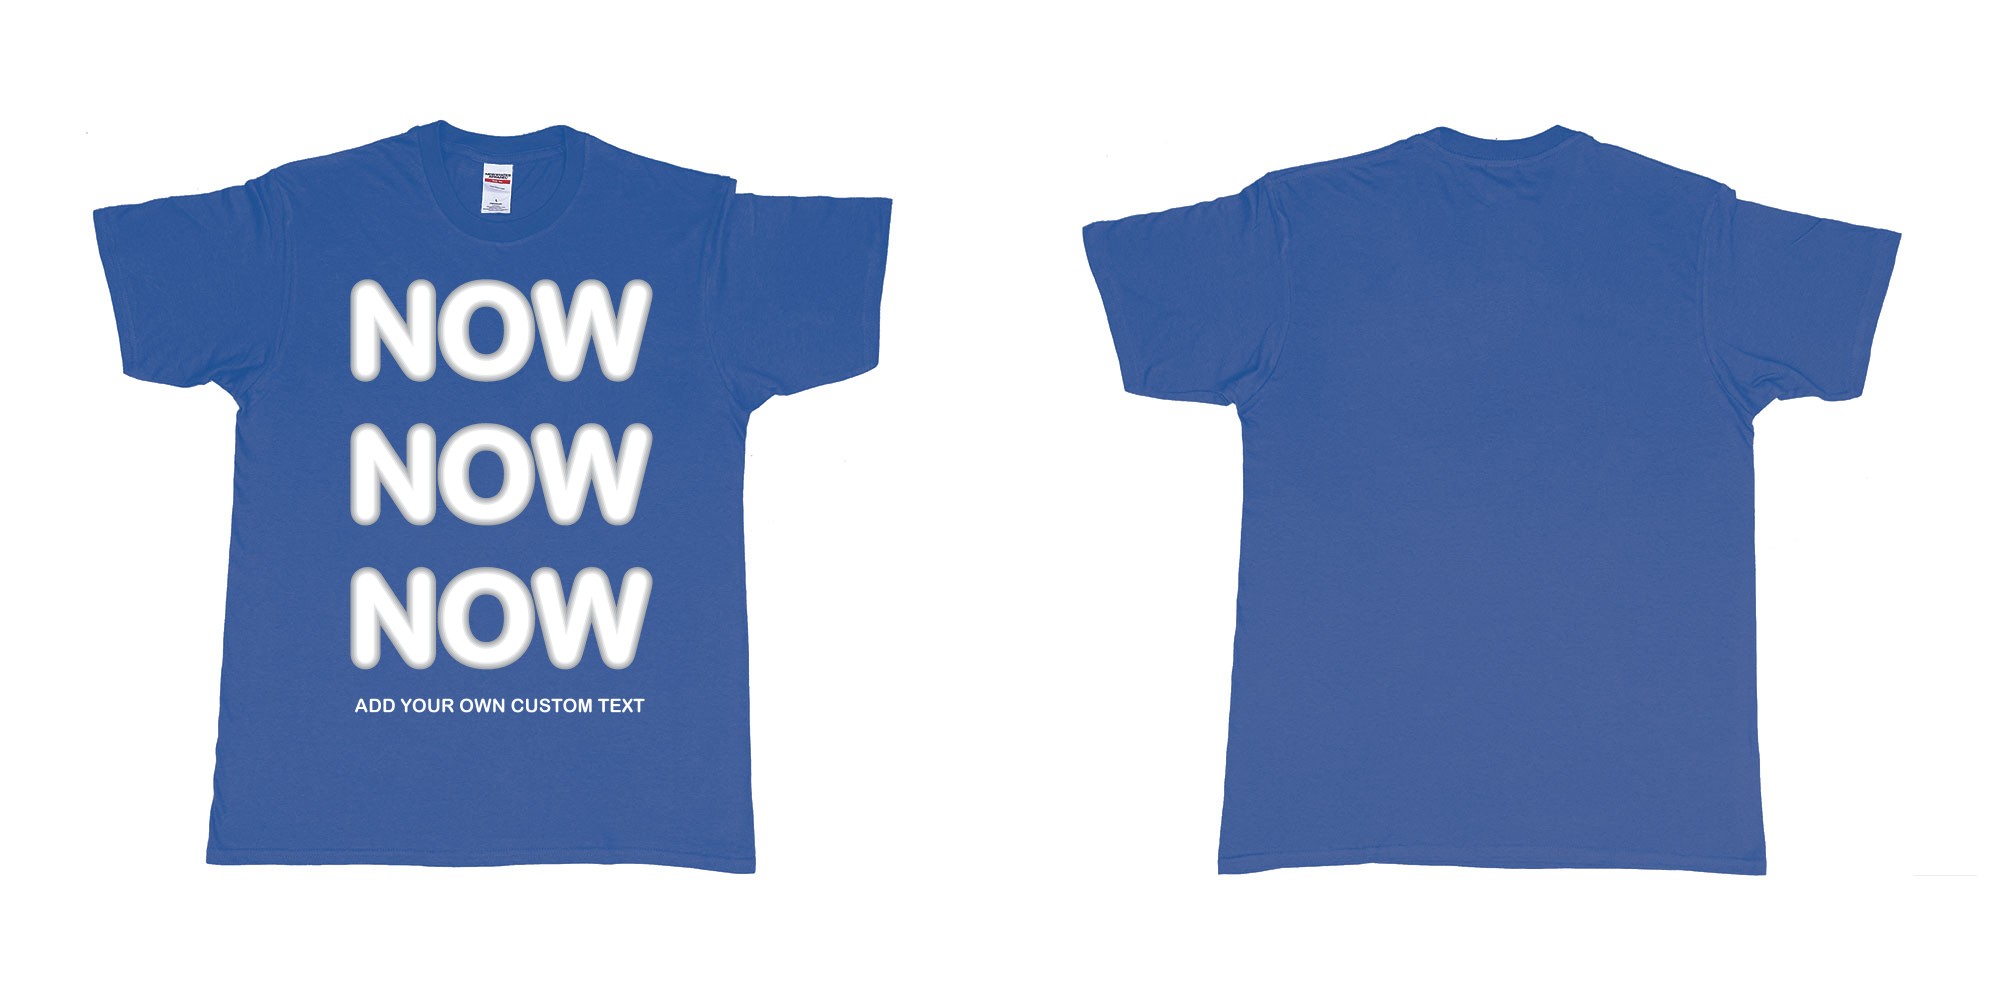 Custom tshirt design now now now add custom text tees in fabric color royal-blue choice your own text made in Bali by The Pirate Way